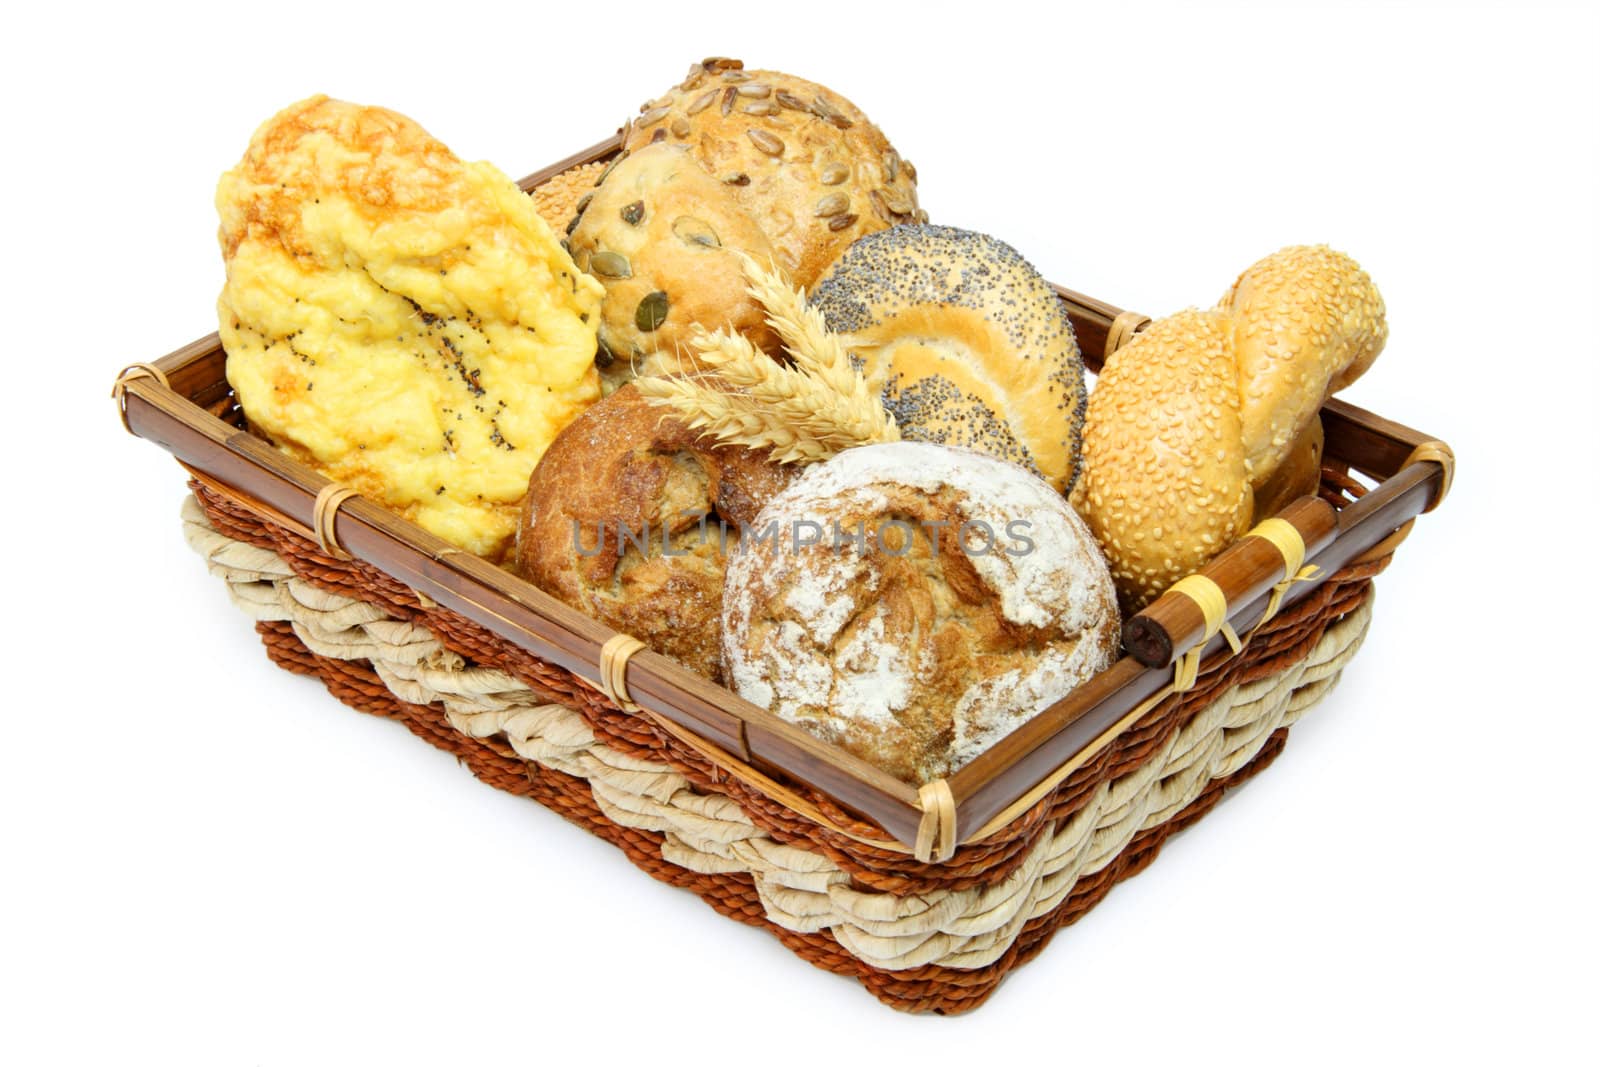 Bread basket with delicious bread rolls on white background